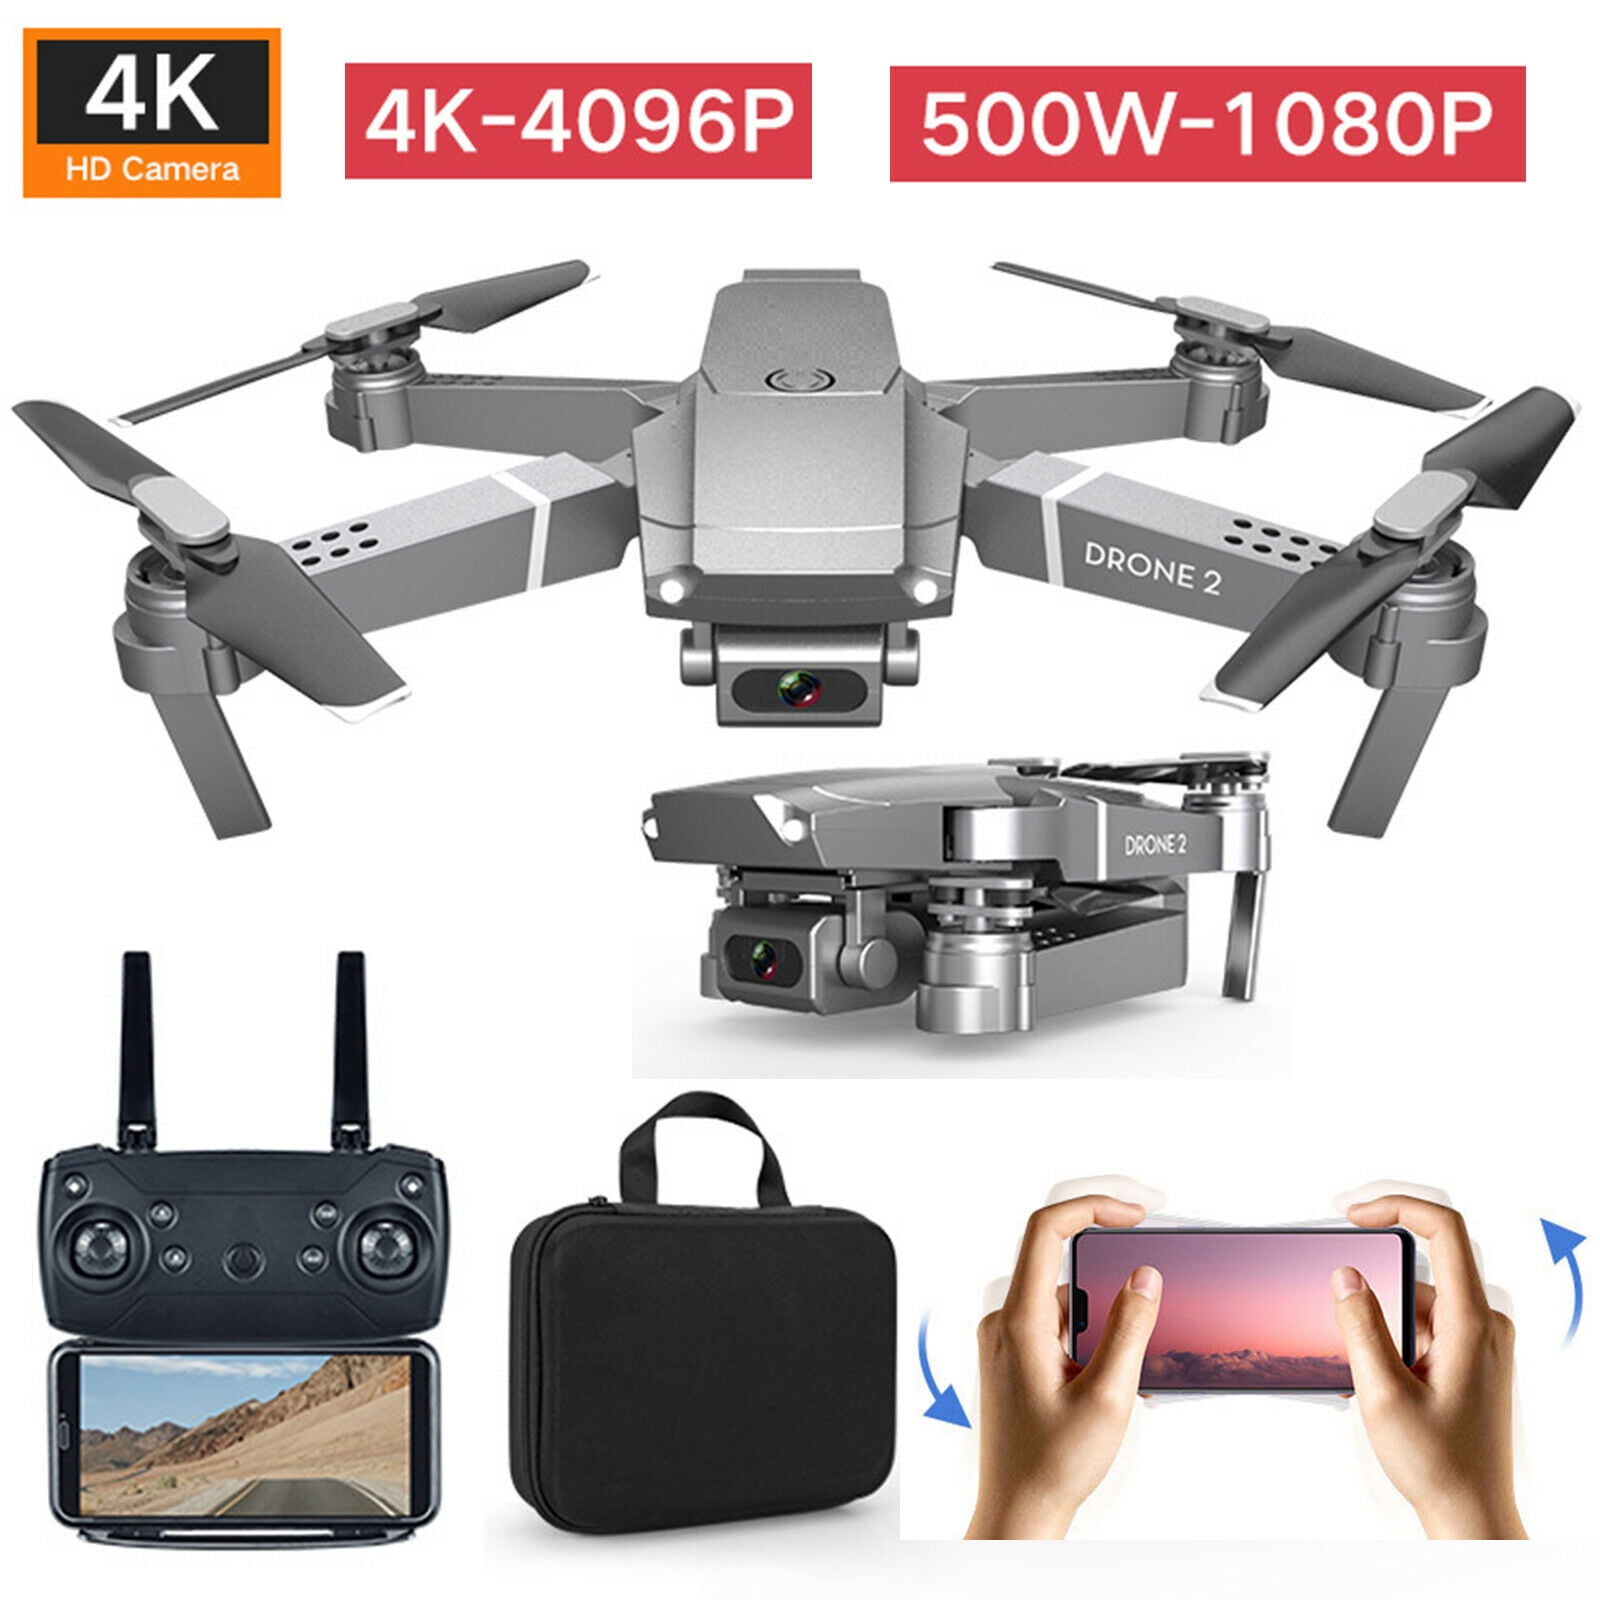 Camera Drone Foldable Aircraft RC Quadcopter Wide Angle HD Selfie FPV Wifi 4K 